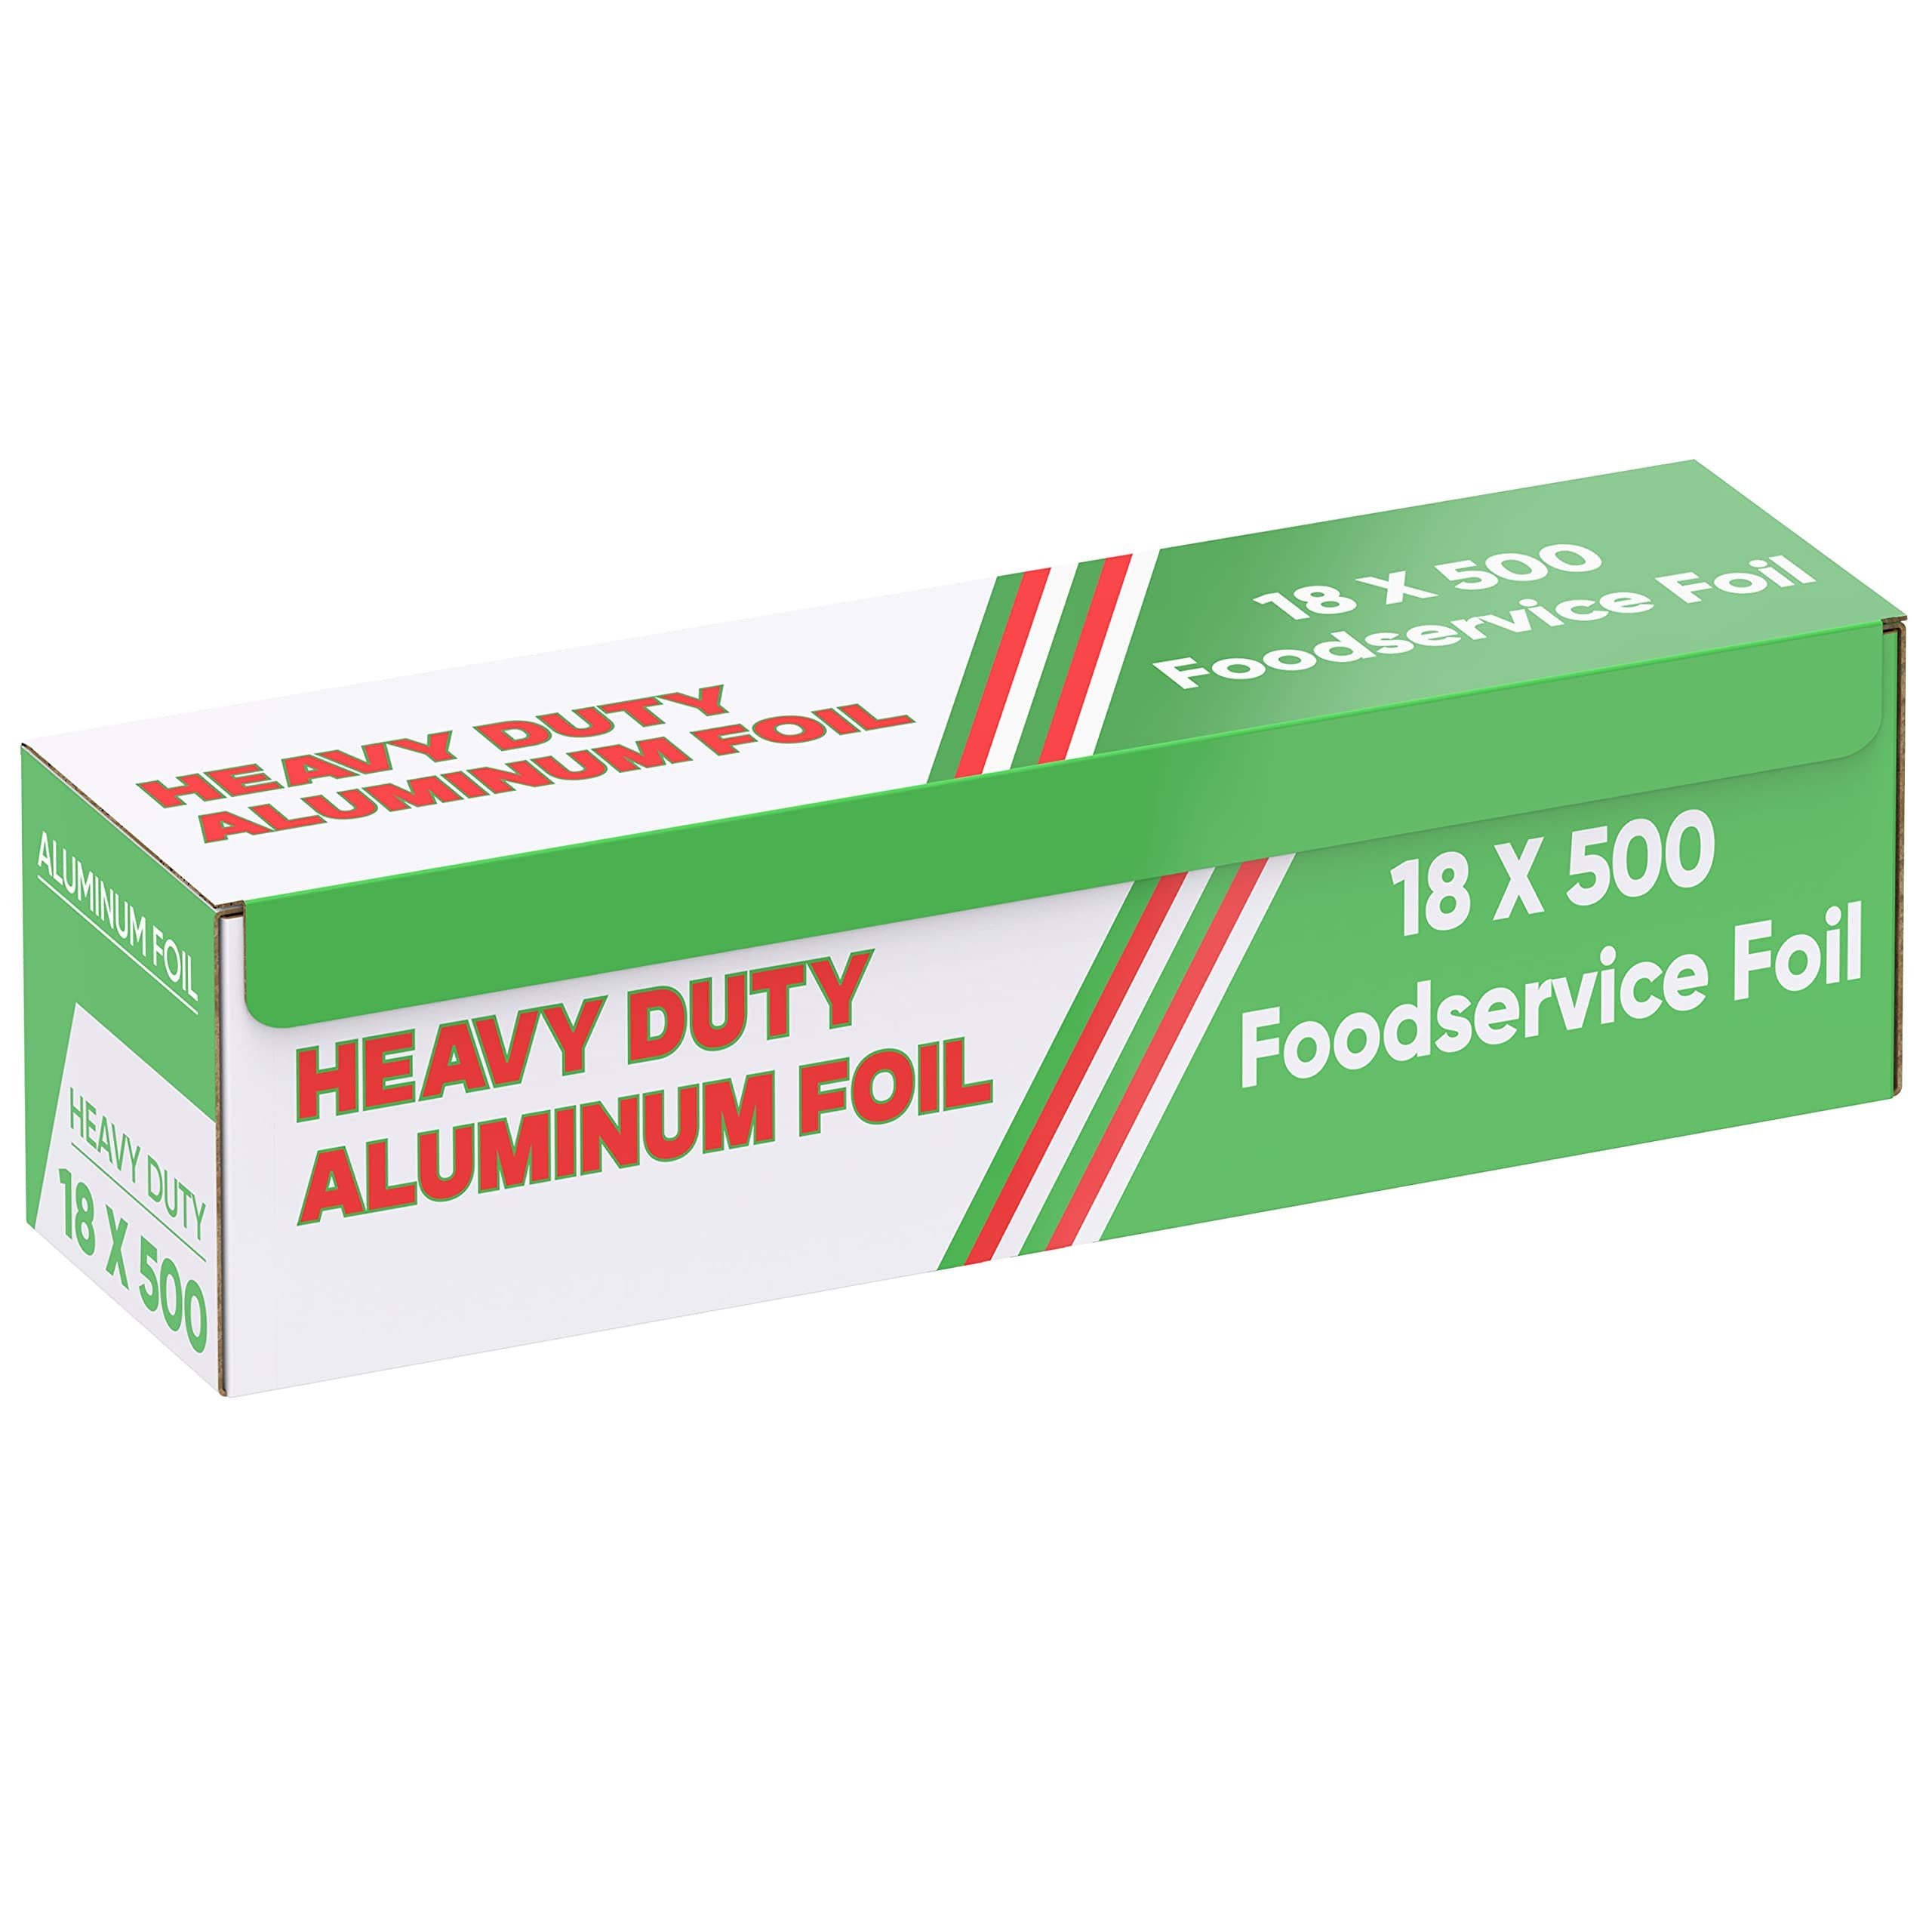 Ox Plastics Freedom Aluminum Foil Wrap | Heavy-Duty, Commercial Grade for Food Service Industry | Silver Foil for Cooking, Roasting, Baking, BBQ & Parties | 22 Microns,18"x 500 Feet (1 Pack)